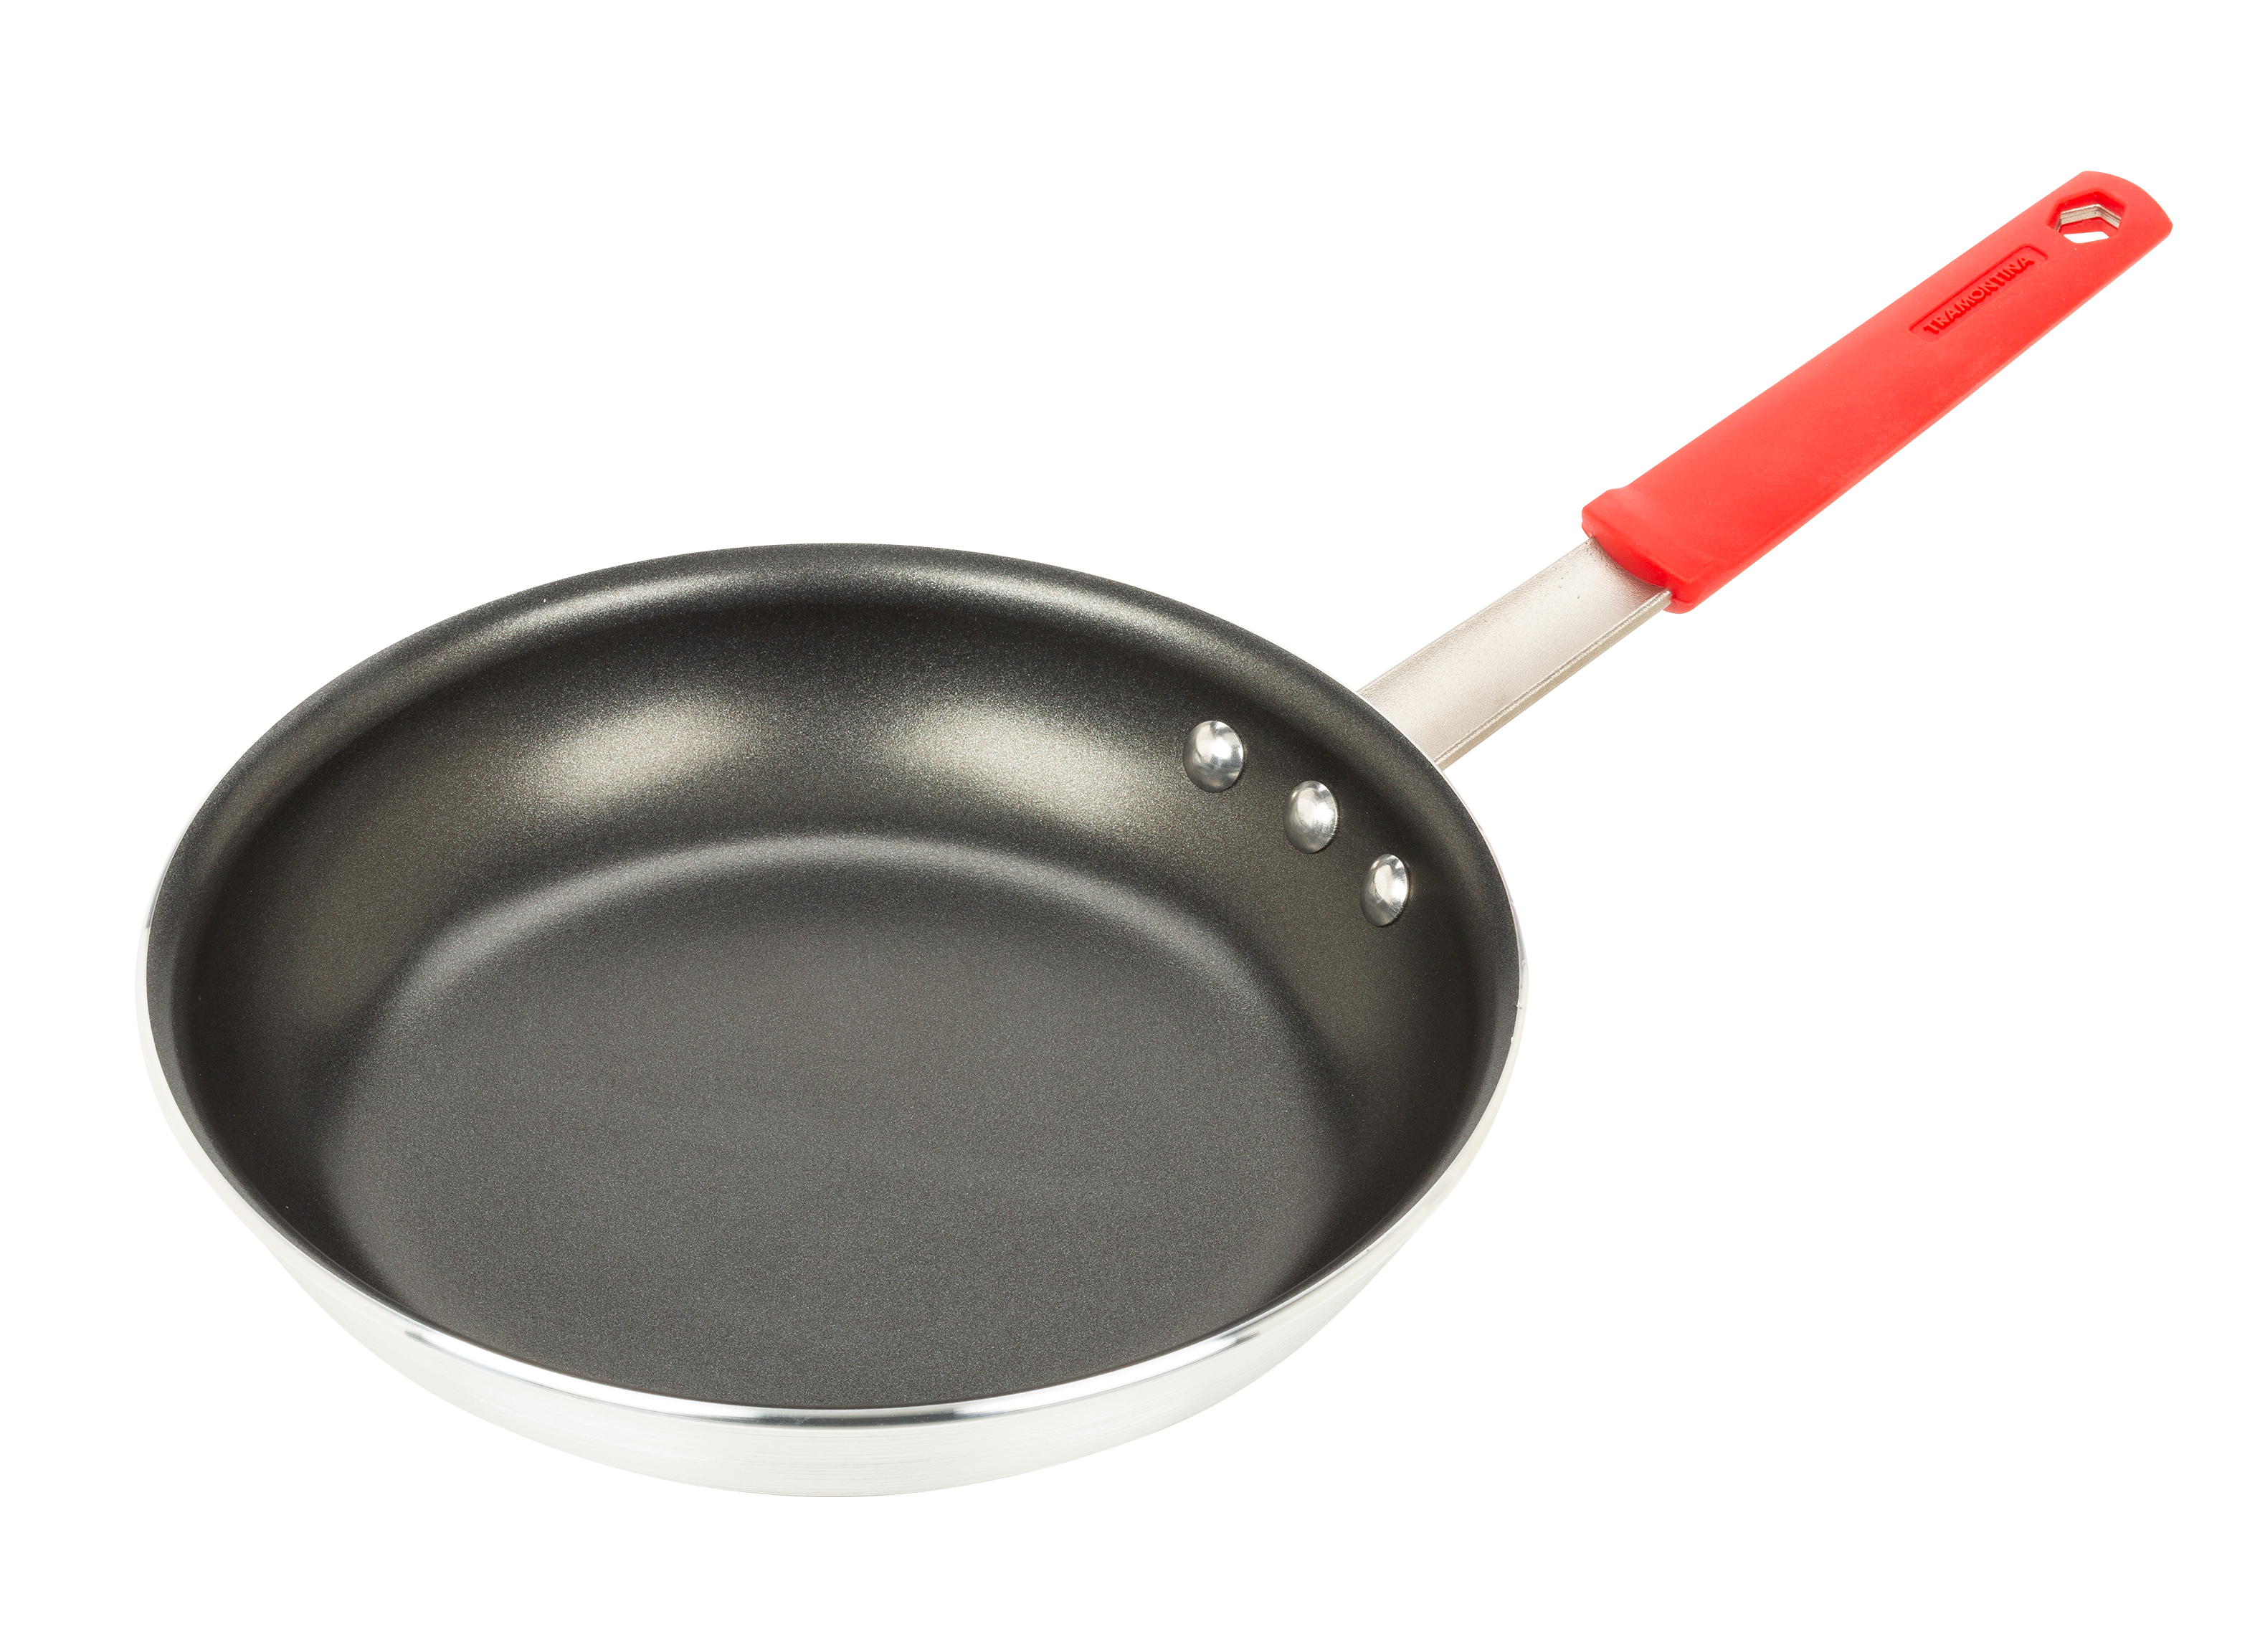 https://crdms.images.consumerreports.org/prod/products/cr/models/405130-frying-pans-nonstick-tramontina-professional-restaurant-10025496.png